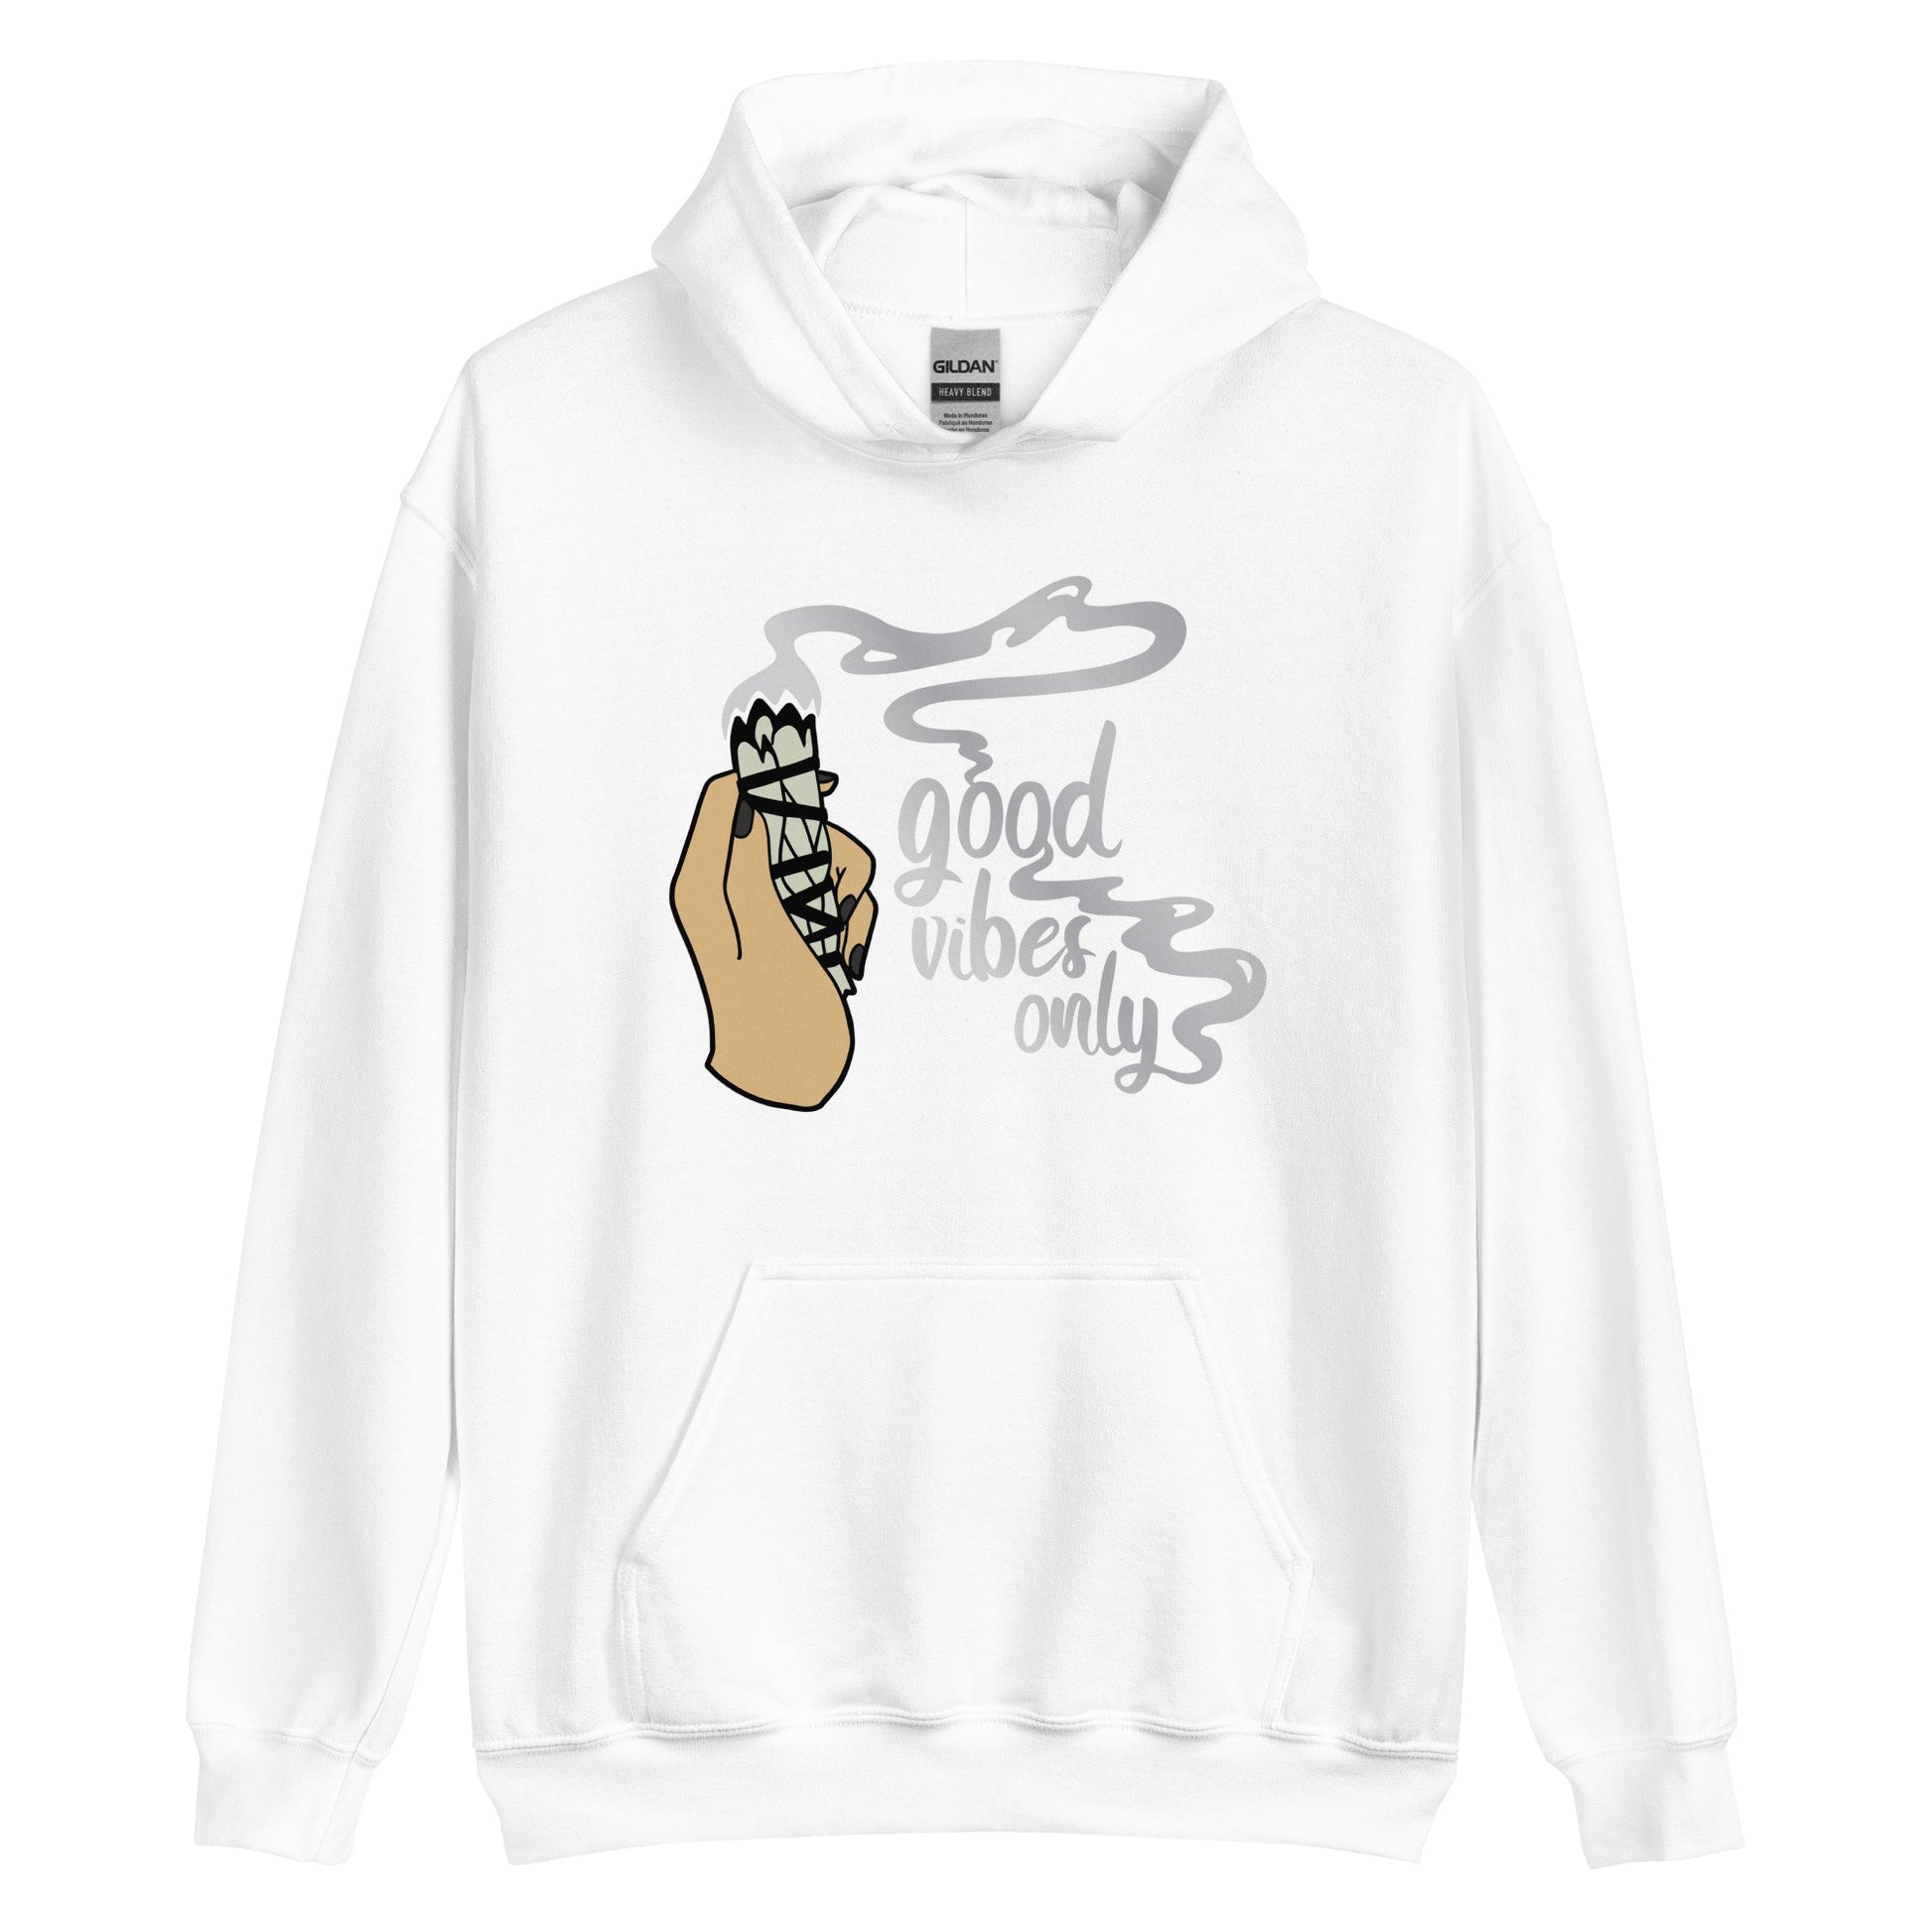 A white hooded sweatshirt with graphic of a hand holding sage smudge stick and text reading "Good Vibes only"